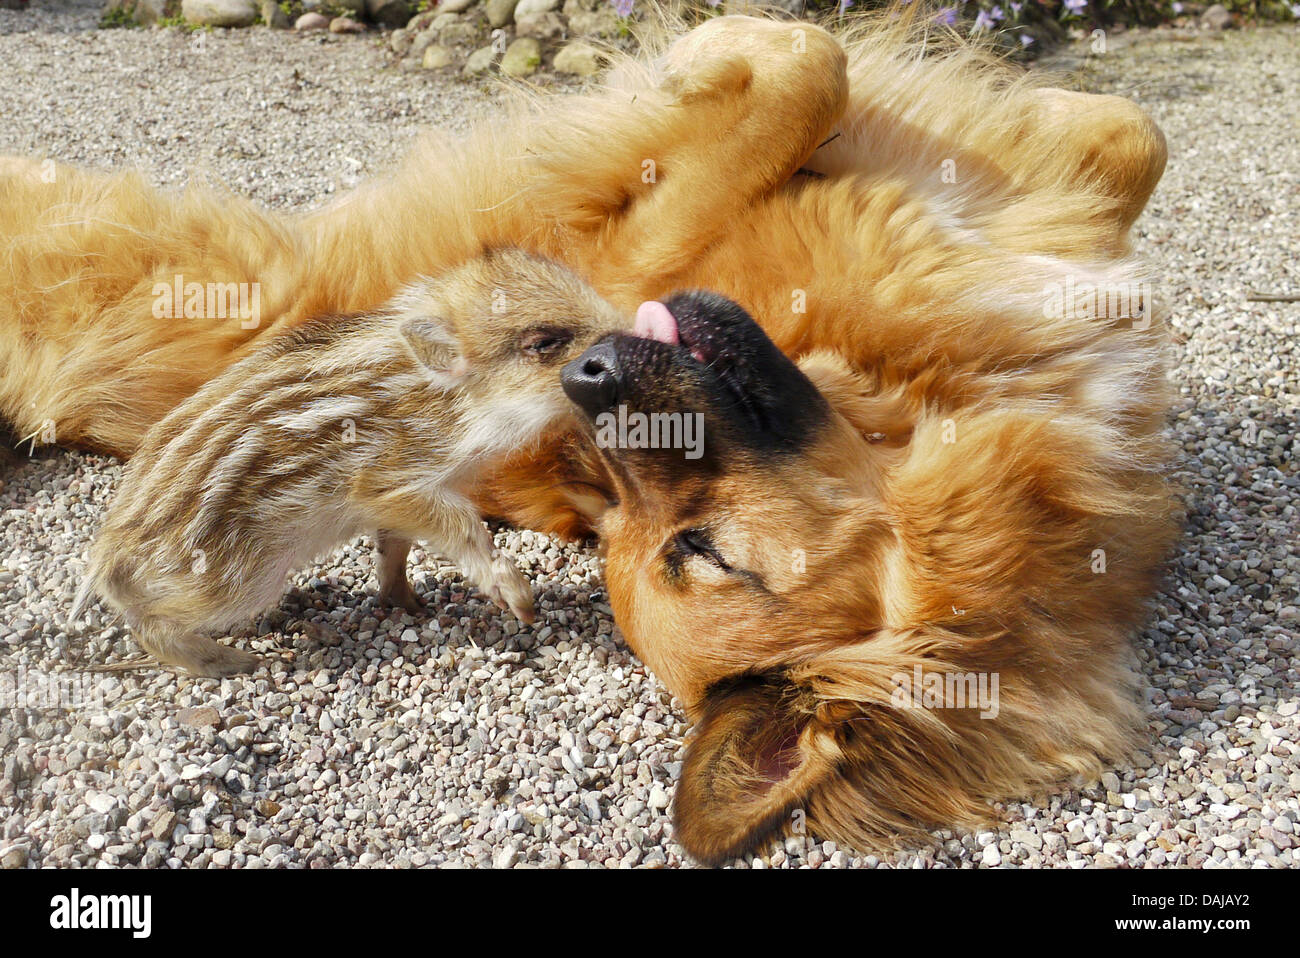 wild boar, pig, wild boar (Sus scrofa), shote playing with a dog in the garden, Germany Stock Photo